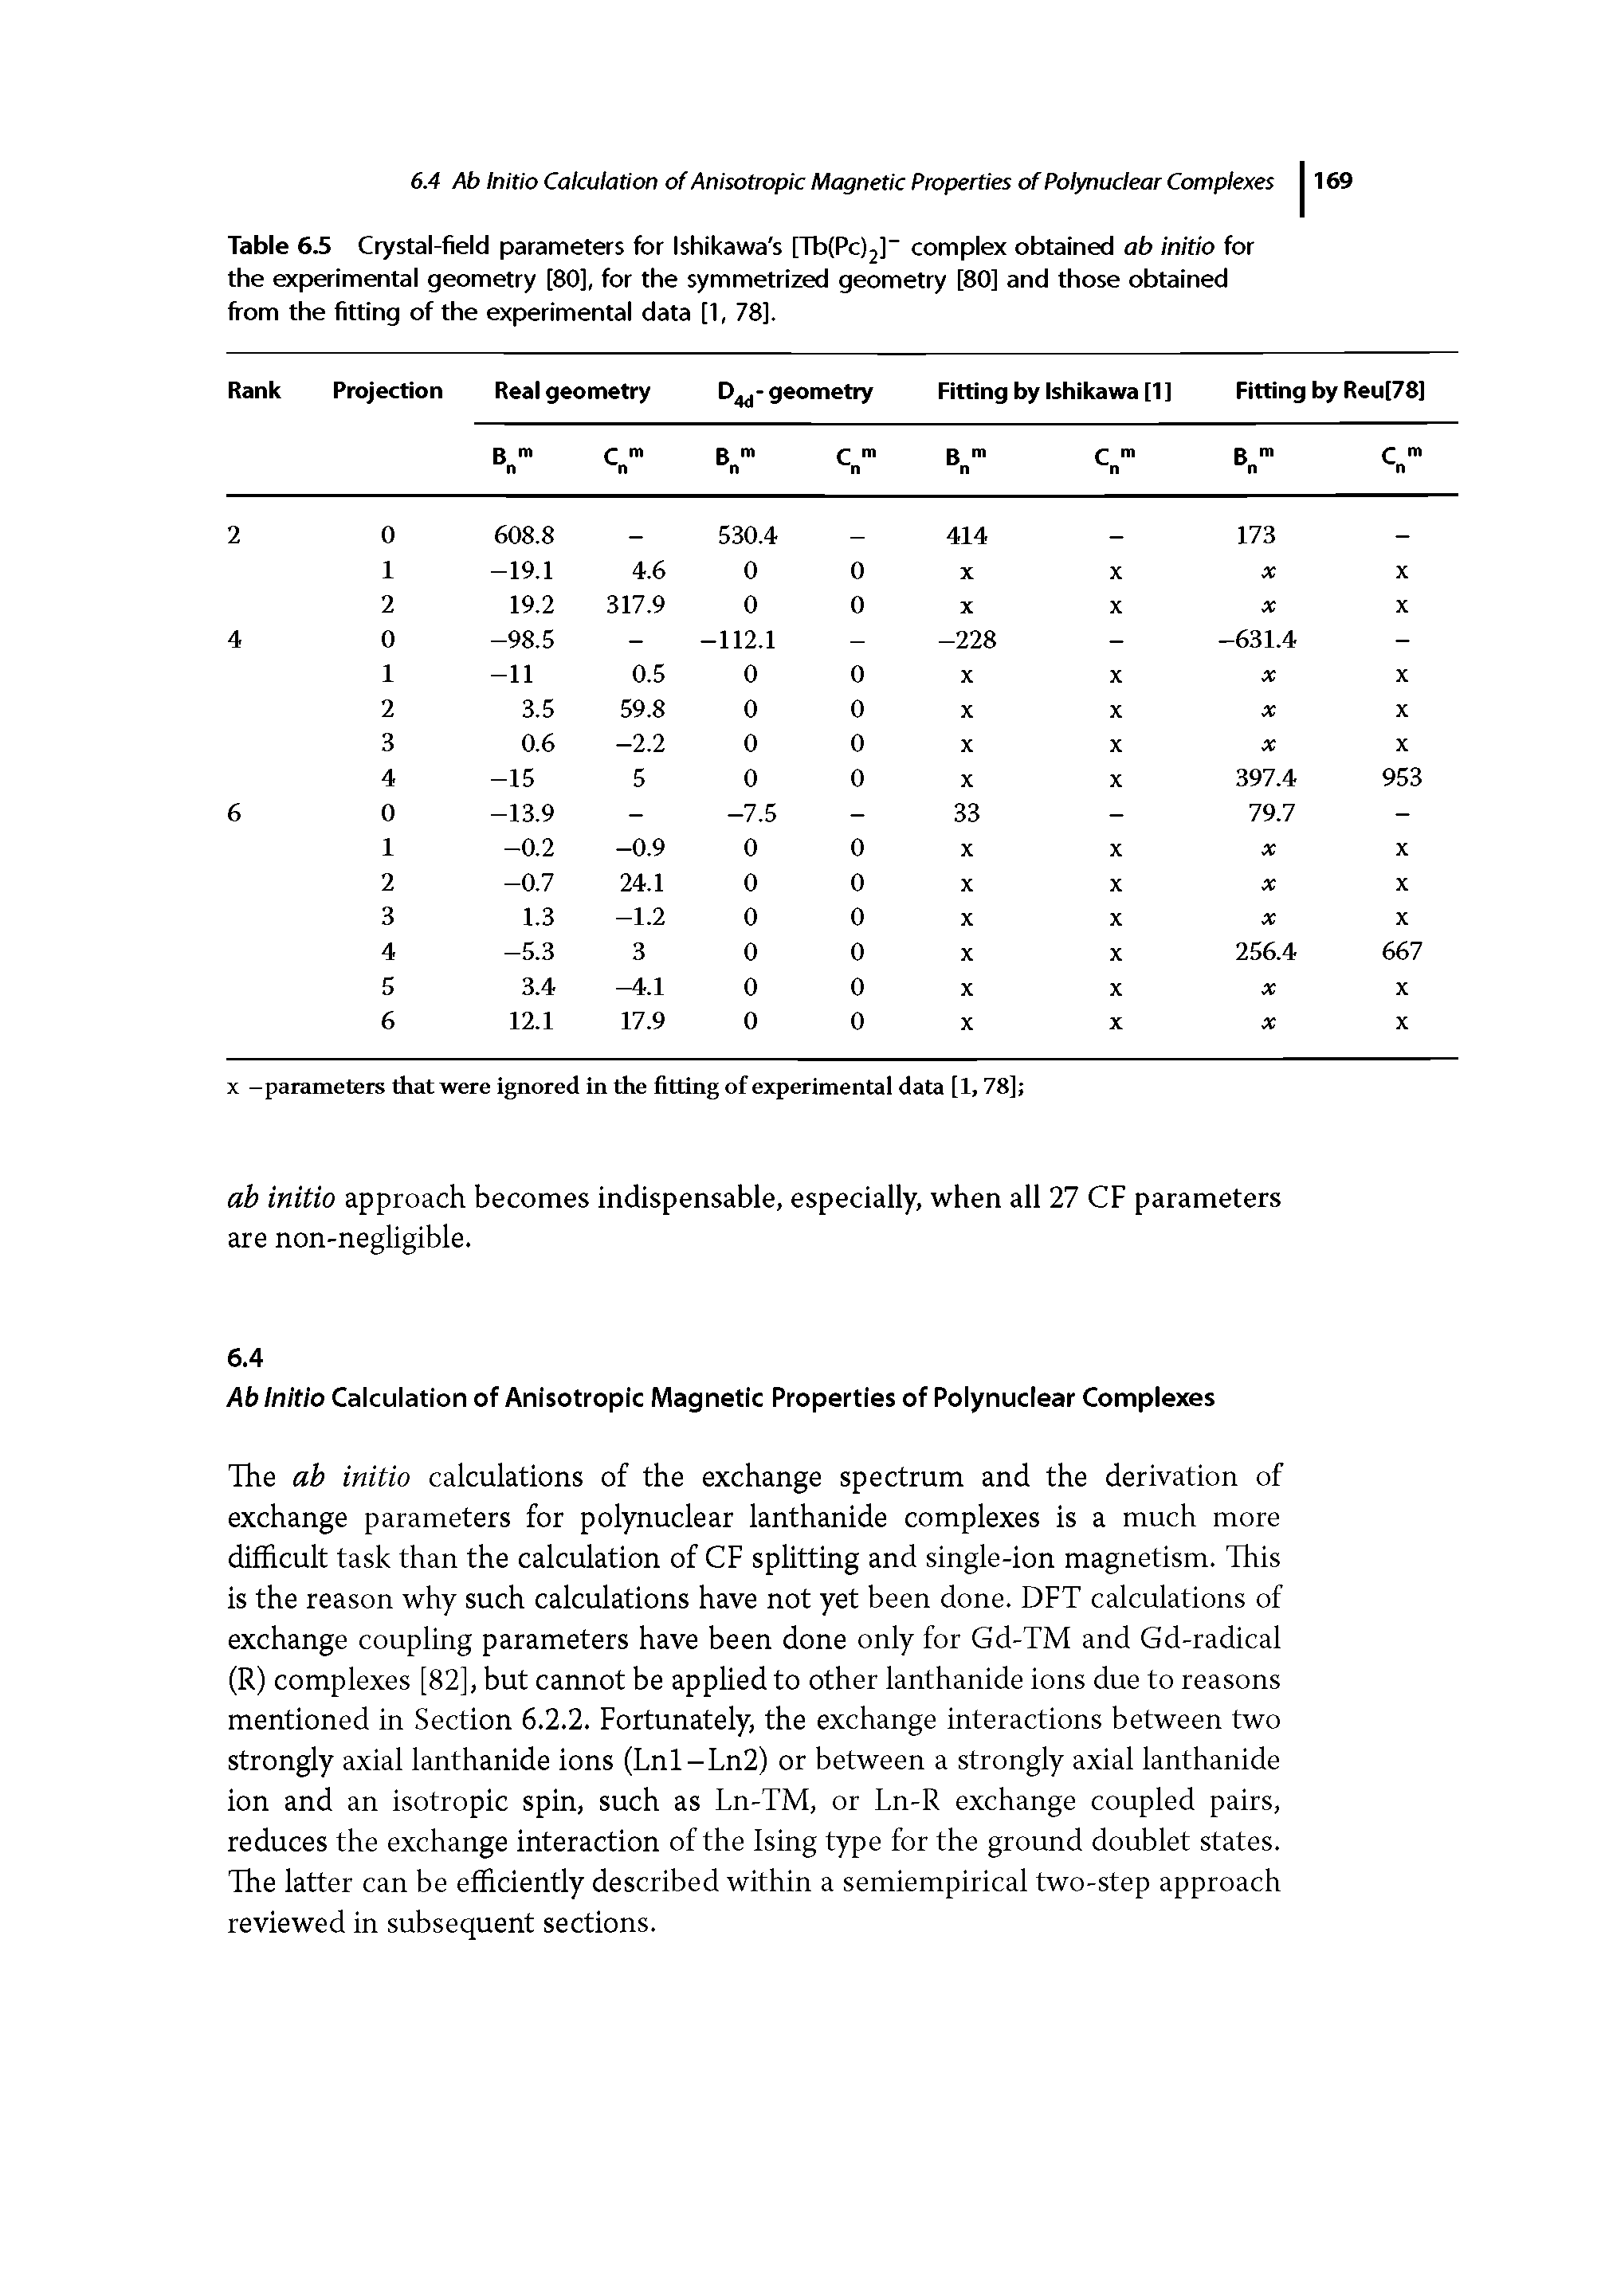 Table 6.5 Crystal-field parameters for Ishikawa s [Tb(Pc)2] complex obtained ab initio for the experimental geometry [80], for the symmetrized geometry [80] and those obtained from the fitting of the experimental data [1, 78].